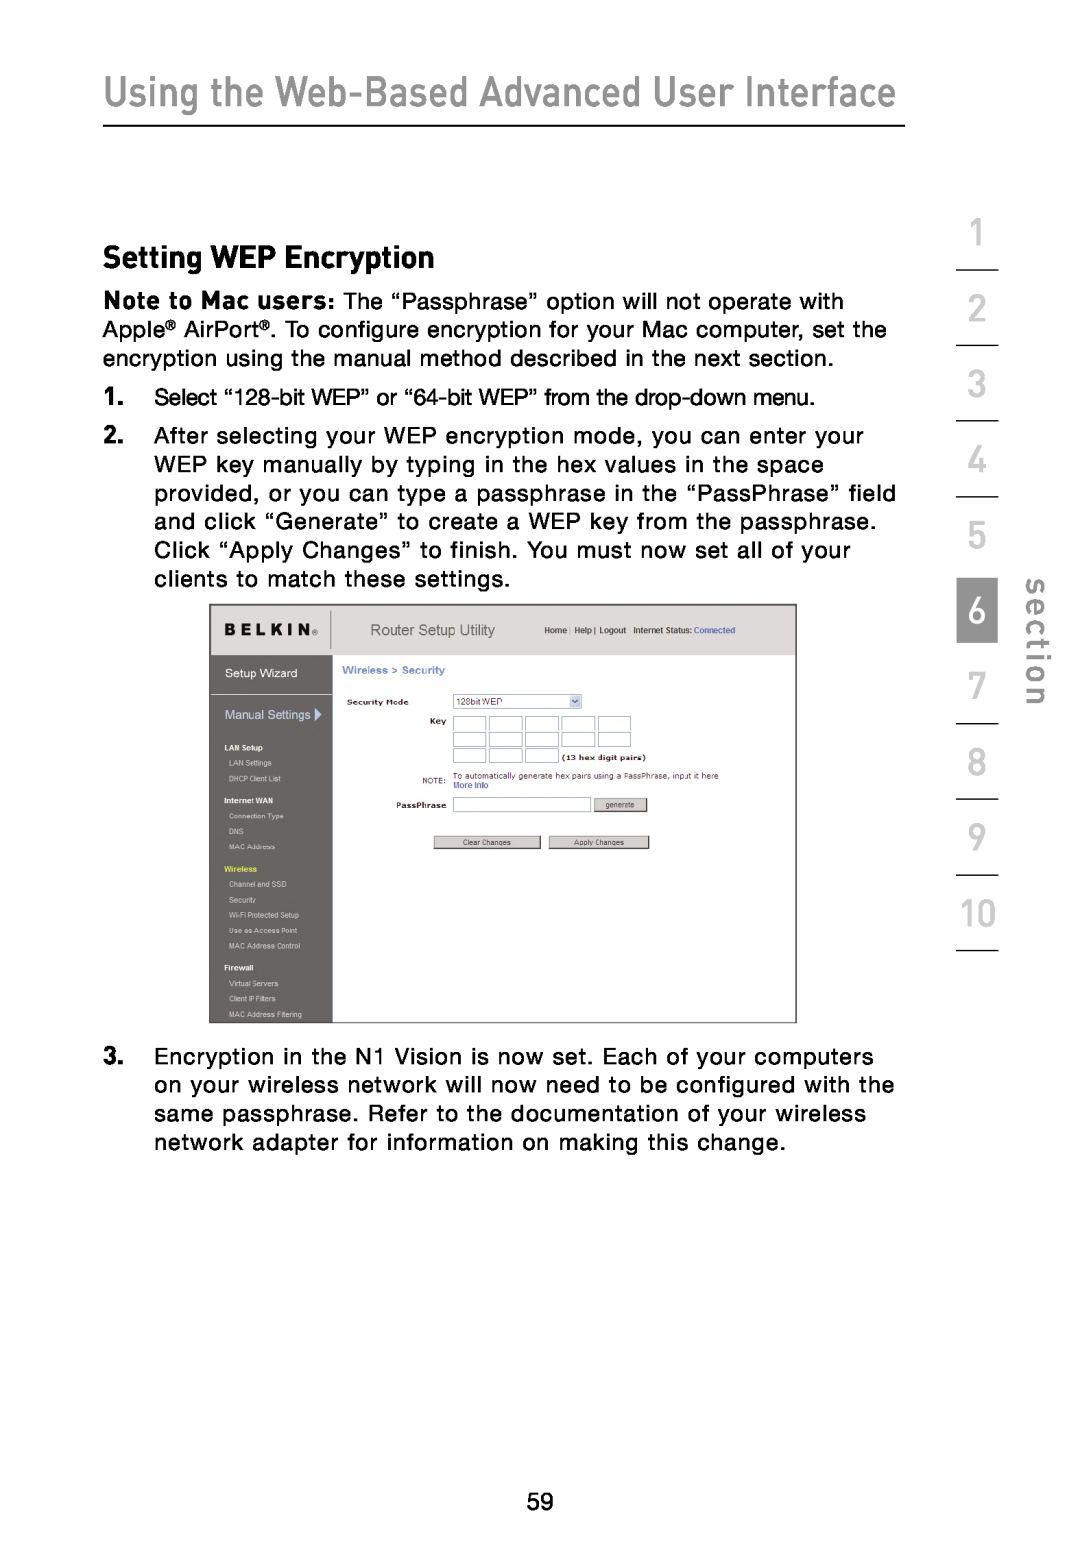 Belkin N1 user manual Setting WEP Encryption, Using the Web-Based Advanced User Interface, section 